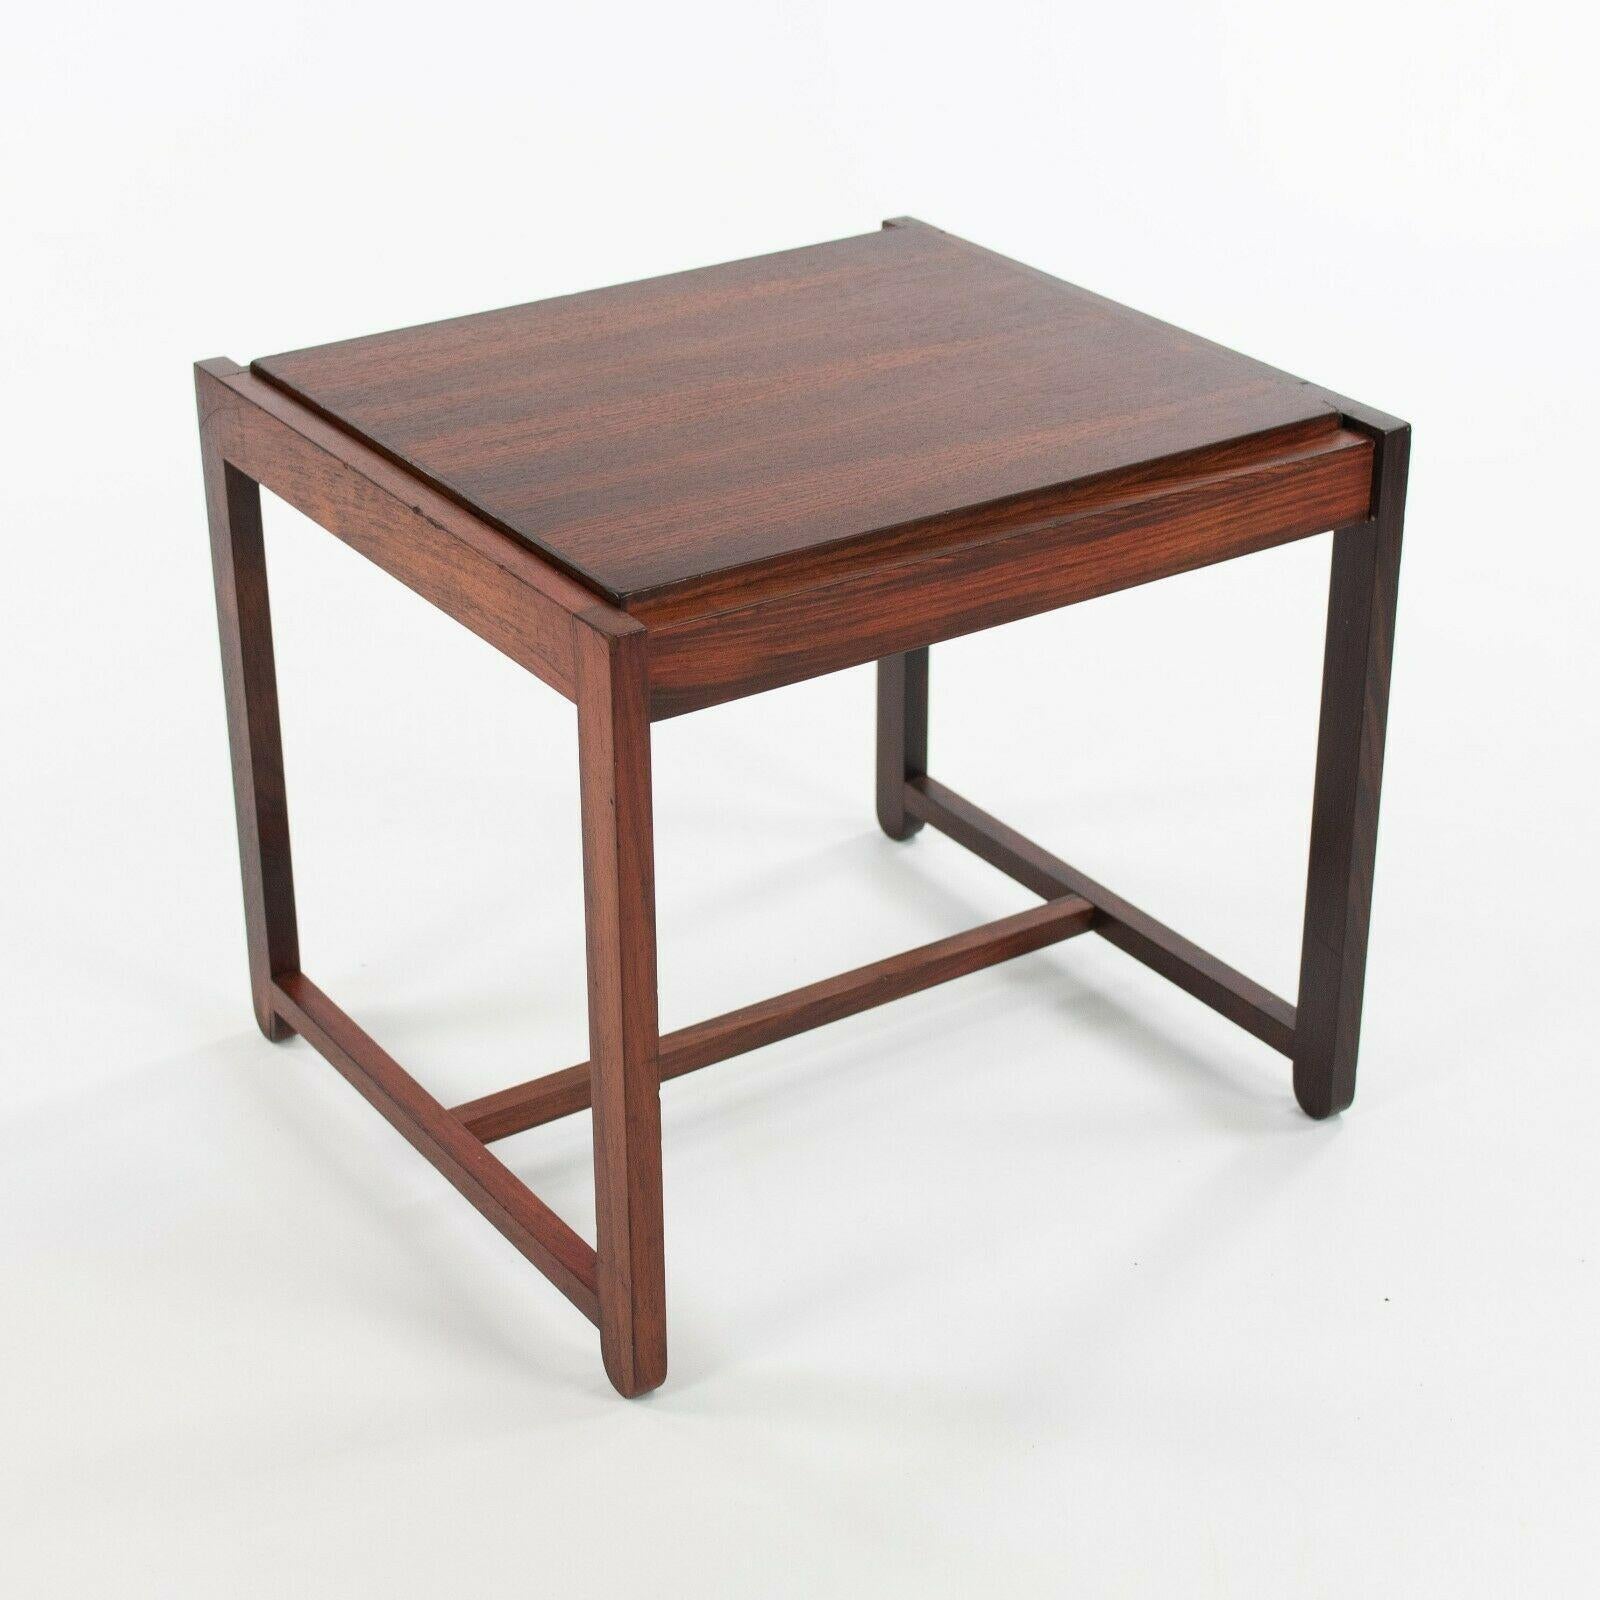 Listed for sale is a very rare flip top stool and end table, designed by Erik Buch and produced by O.D. Mobler (formerly Oddense Maskinsnedkeri) in Denmark. This gorgeous design was constructed from solid Brazilian rosewood and produced circa 1969.